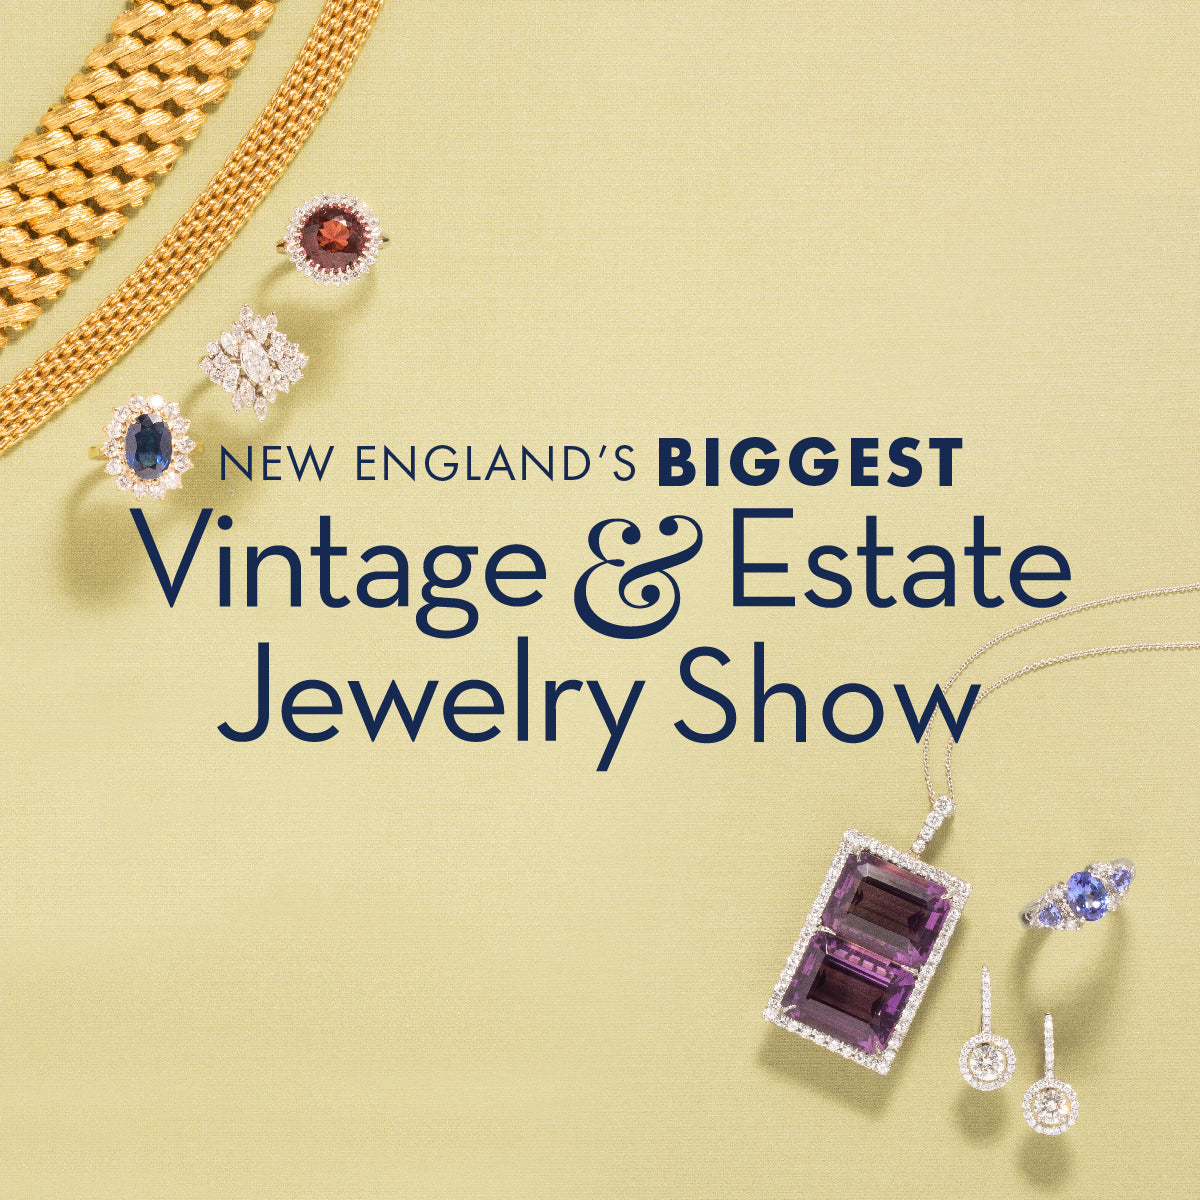 Spring Vintage & Estate Jewelry Show in Peabody